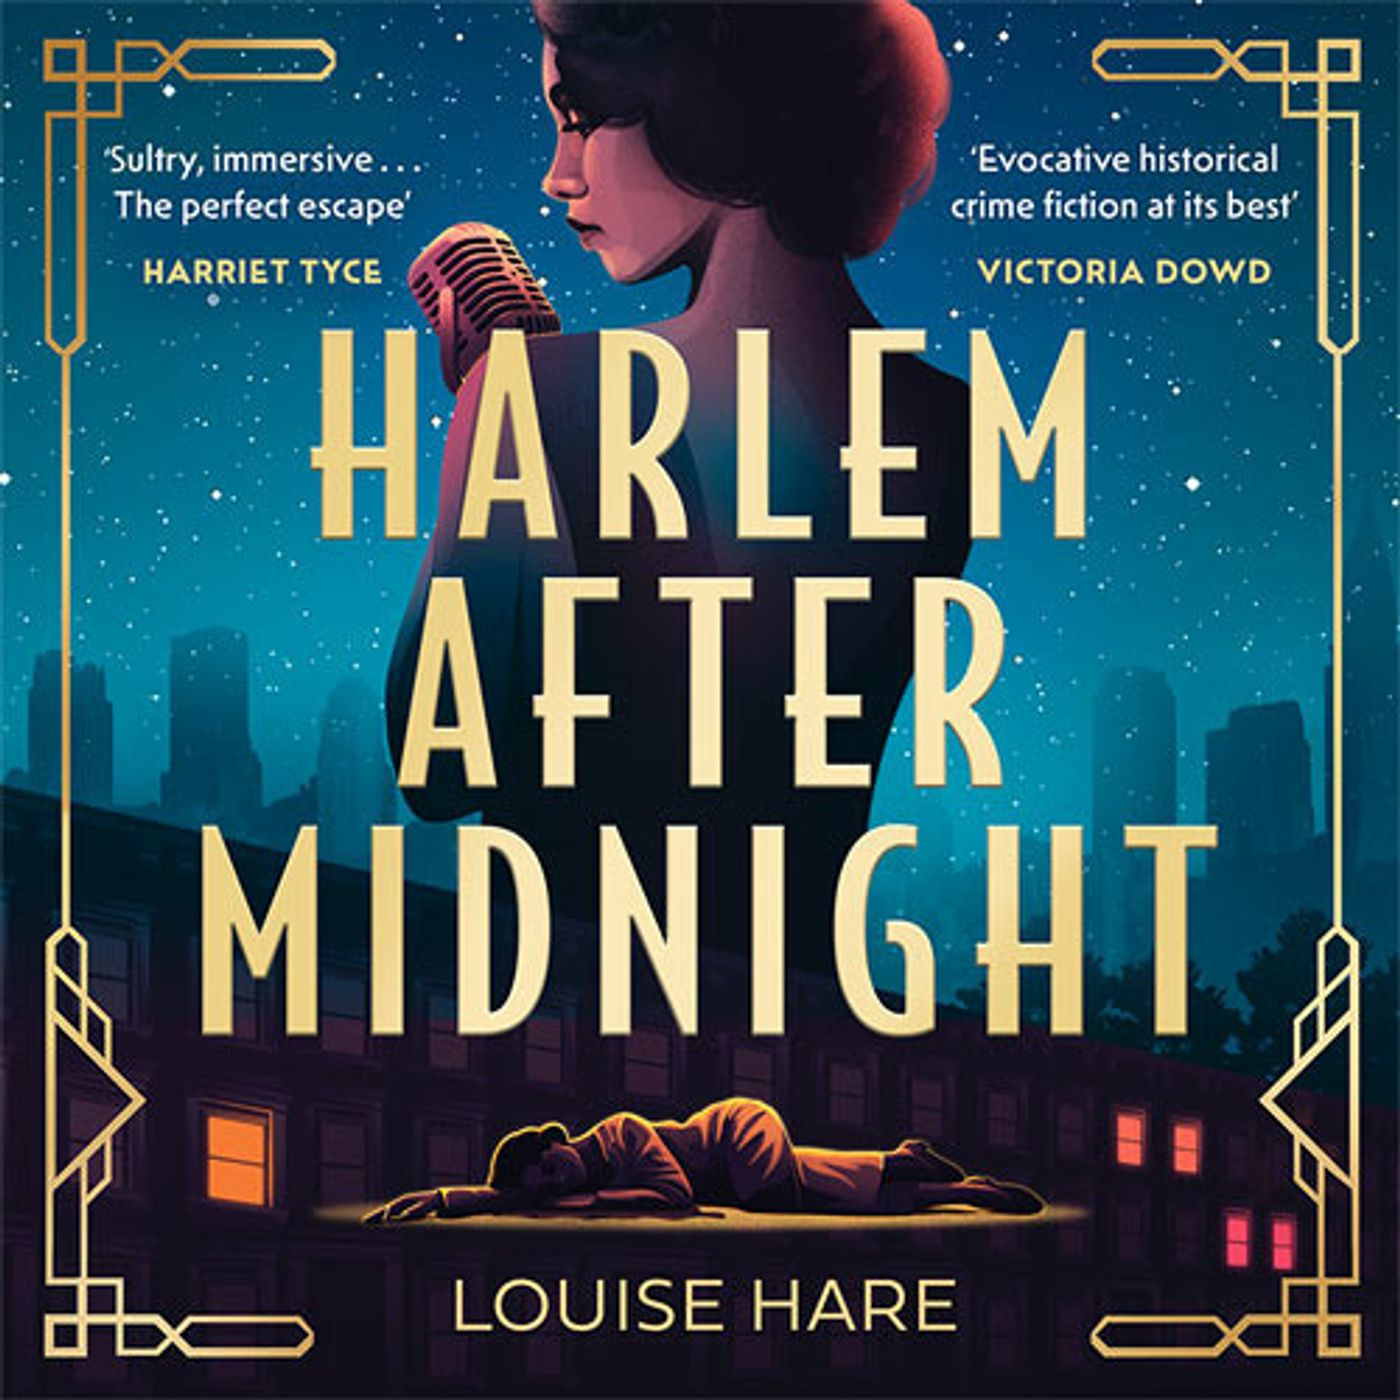 366: Louise Hare - Harlem After Midnight